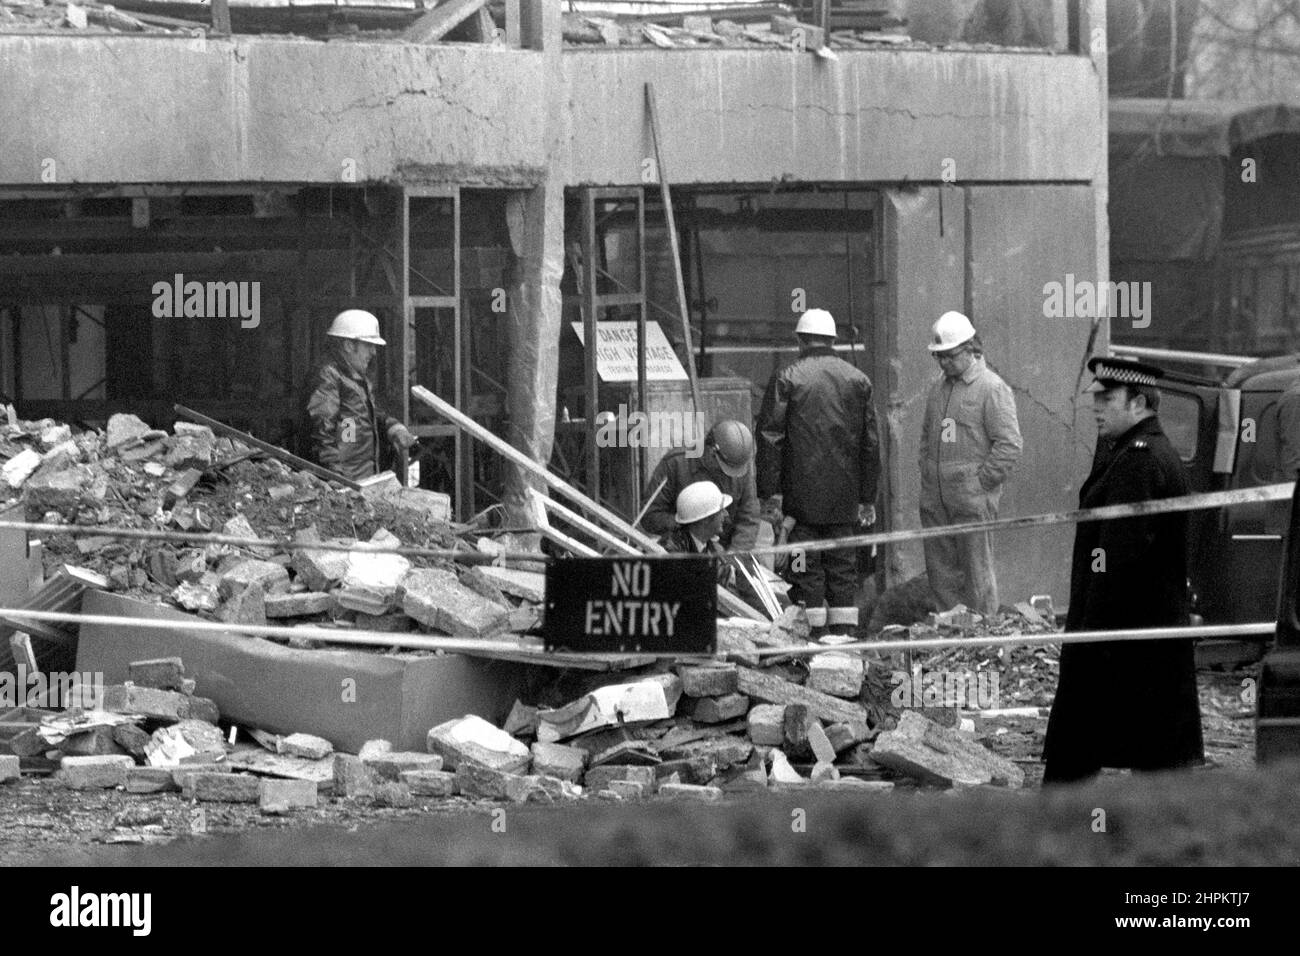 File photo dated 22/02/72 of forensic experts looking through the rubble caused by the bomb explosion which blasted the building at the Aldershot Barracks killing seven people in an IRA bomb. A memorial to mark the bombing of the HQ 16th Independent Parachute Brigade Officers' Mess will be unveiled at Aldershot Barracks, Hampshire, marking the 50th anniversary of the car bomb which was left outside the officers' mess of the 16th Parachute Brigade in Aldershot, killing a Roman Catholic priest serving in the army, a gardener, and five female kitchen staff. The IRA claimed it was in retaliation t Stock Photo